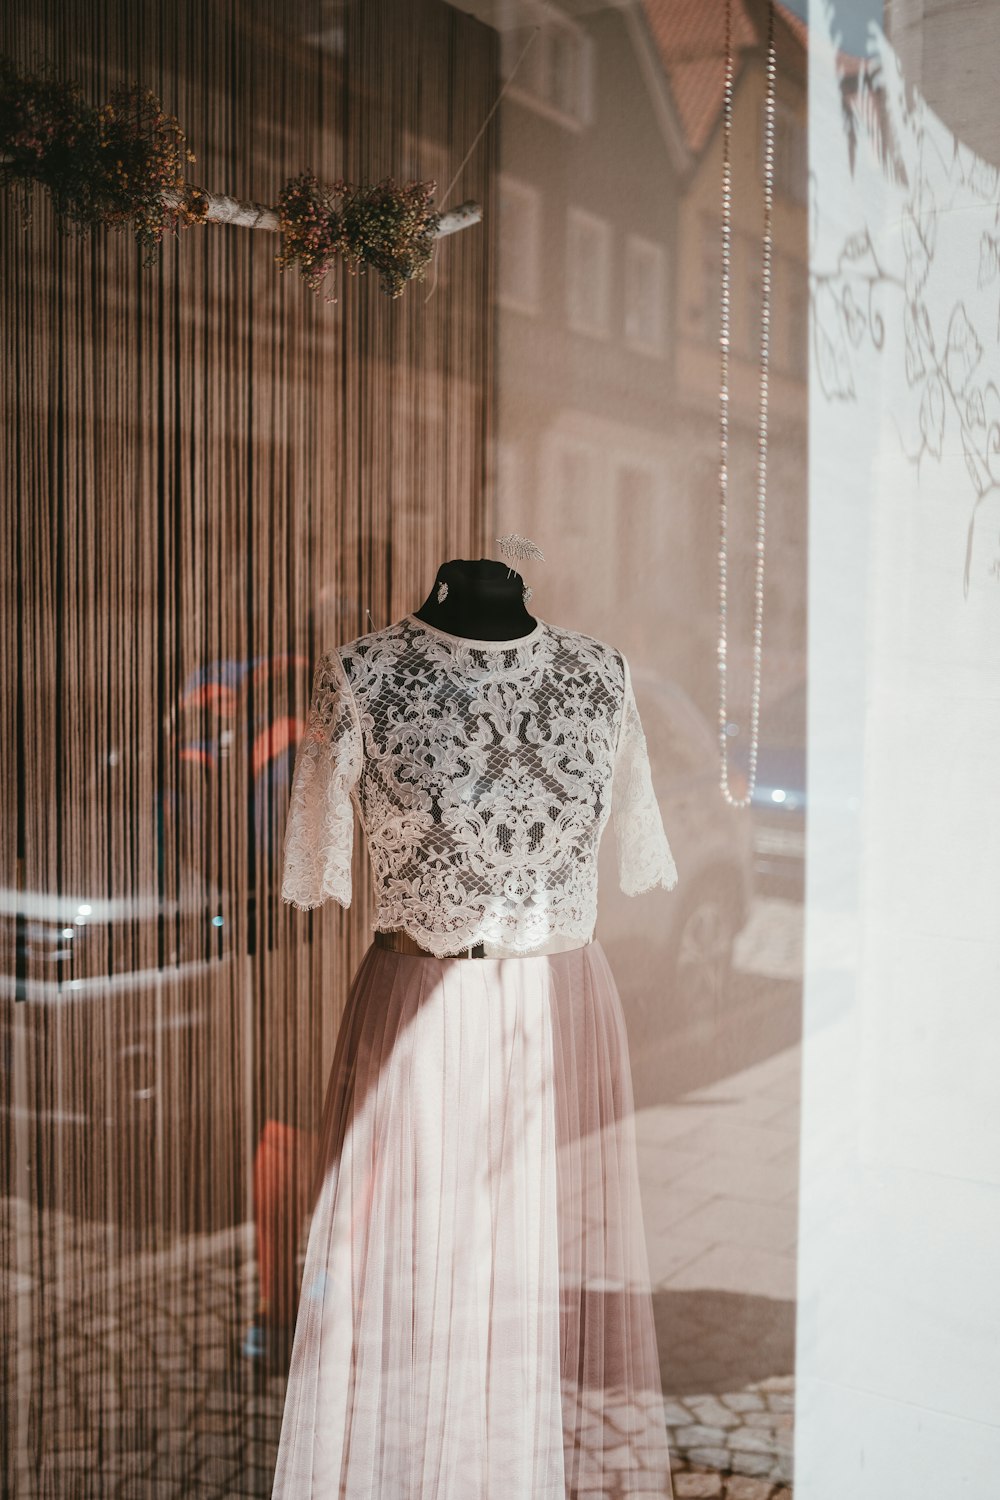 a dress on display in a store window